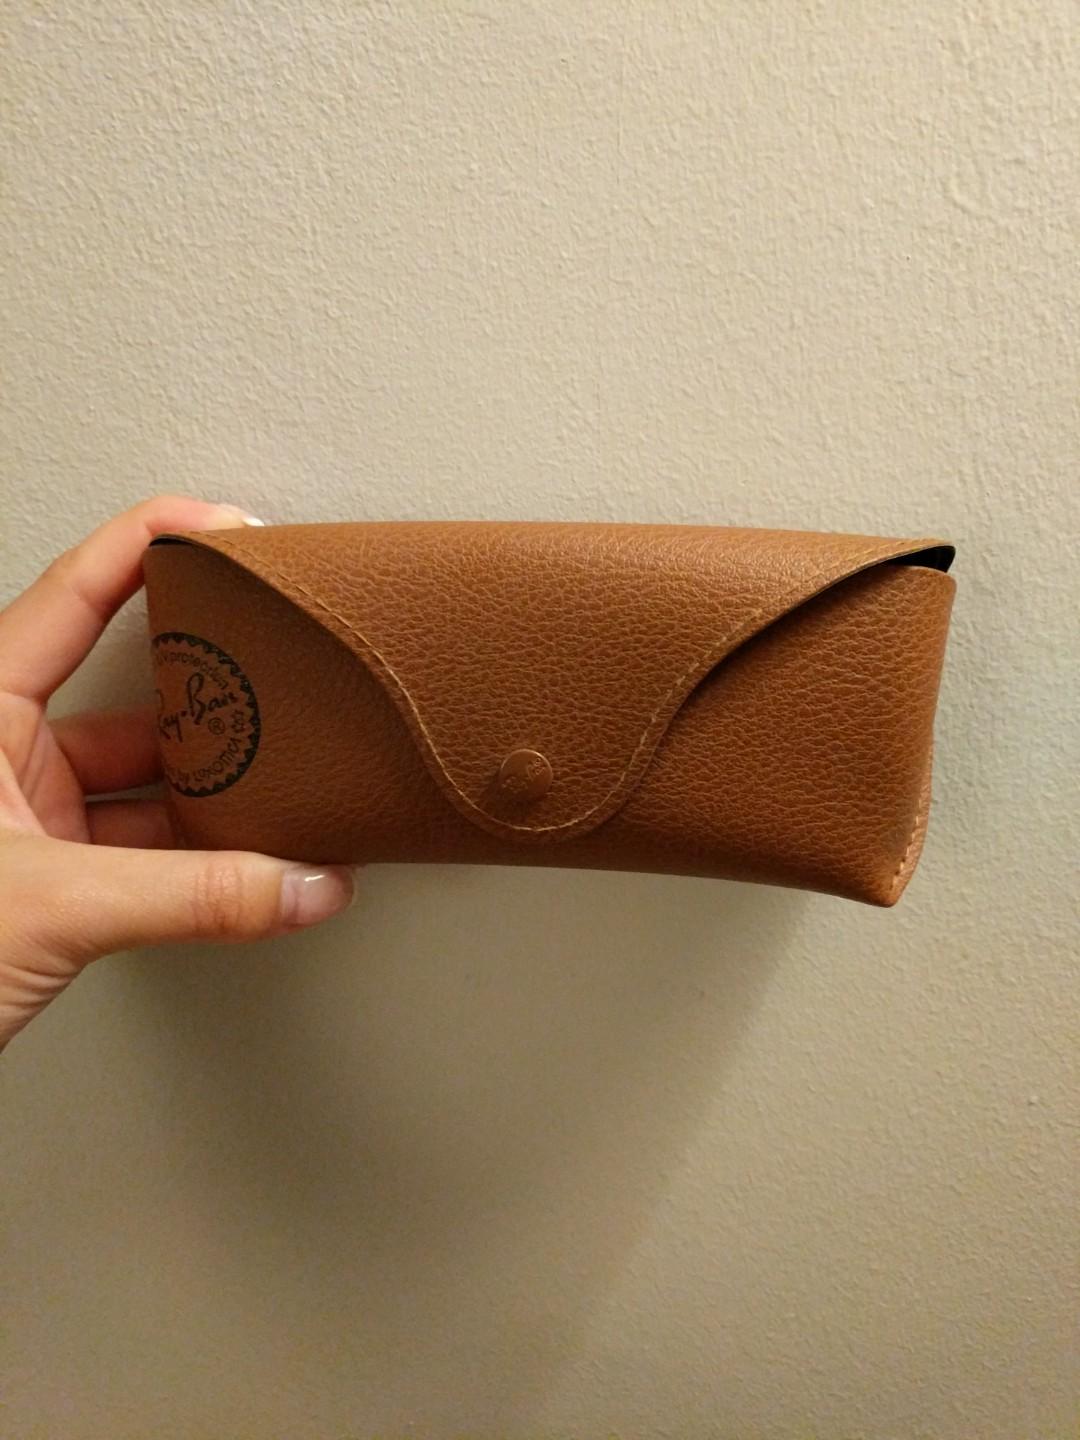 NEW Original Ray Ban Beige Leather Sunglasses Glasses Pouch Case Flip Top  with Snap, Women's Fashion, Watches & Accessories, Sunglasses & Eyewear on  Carousell